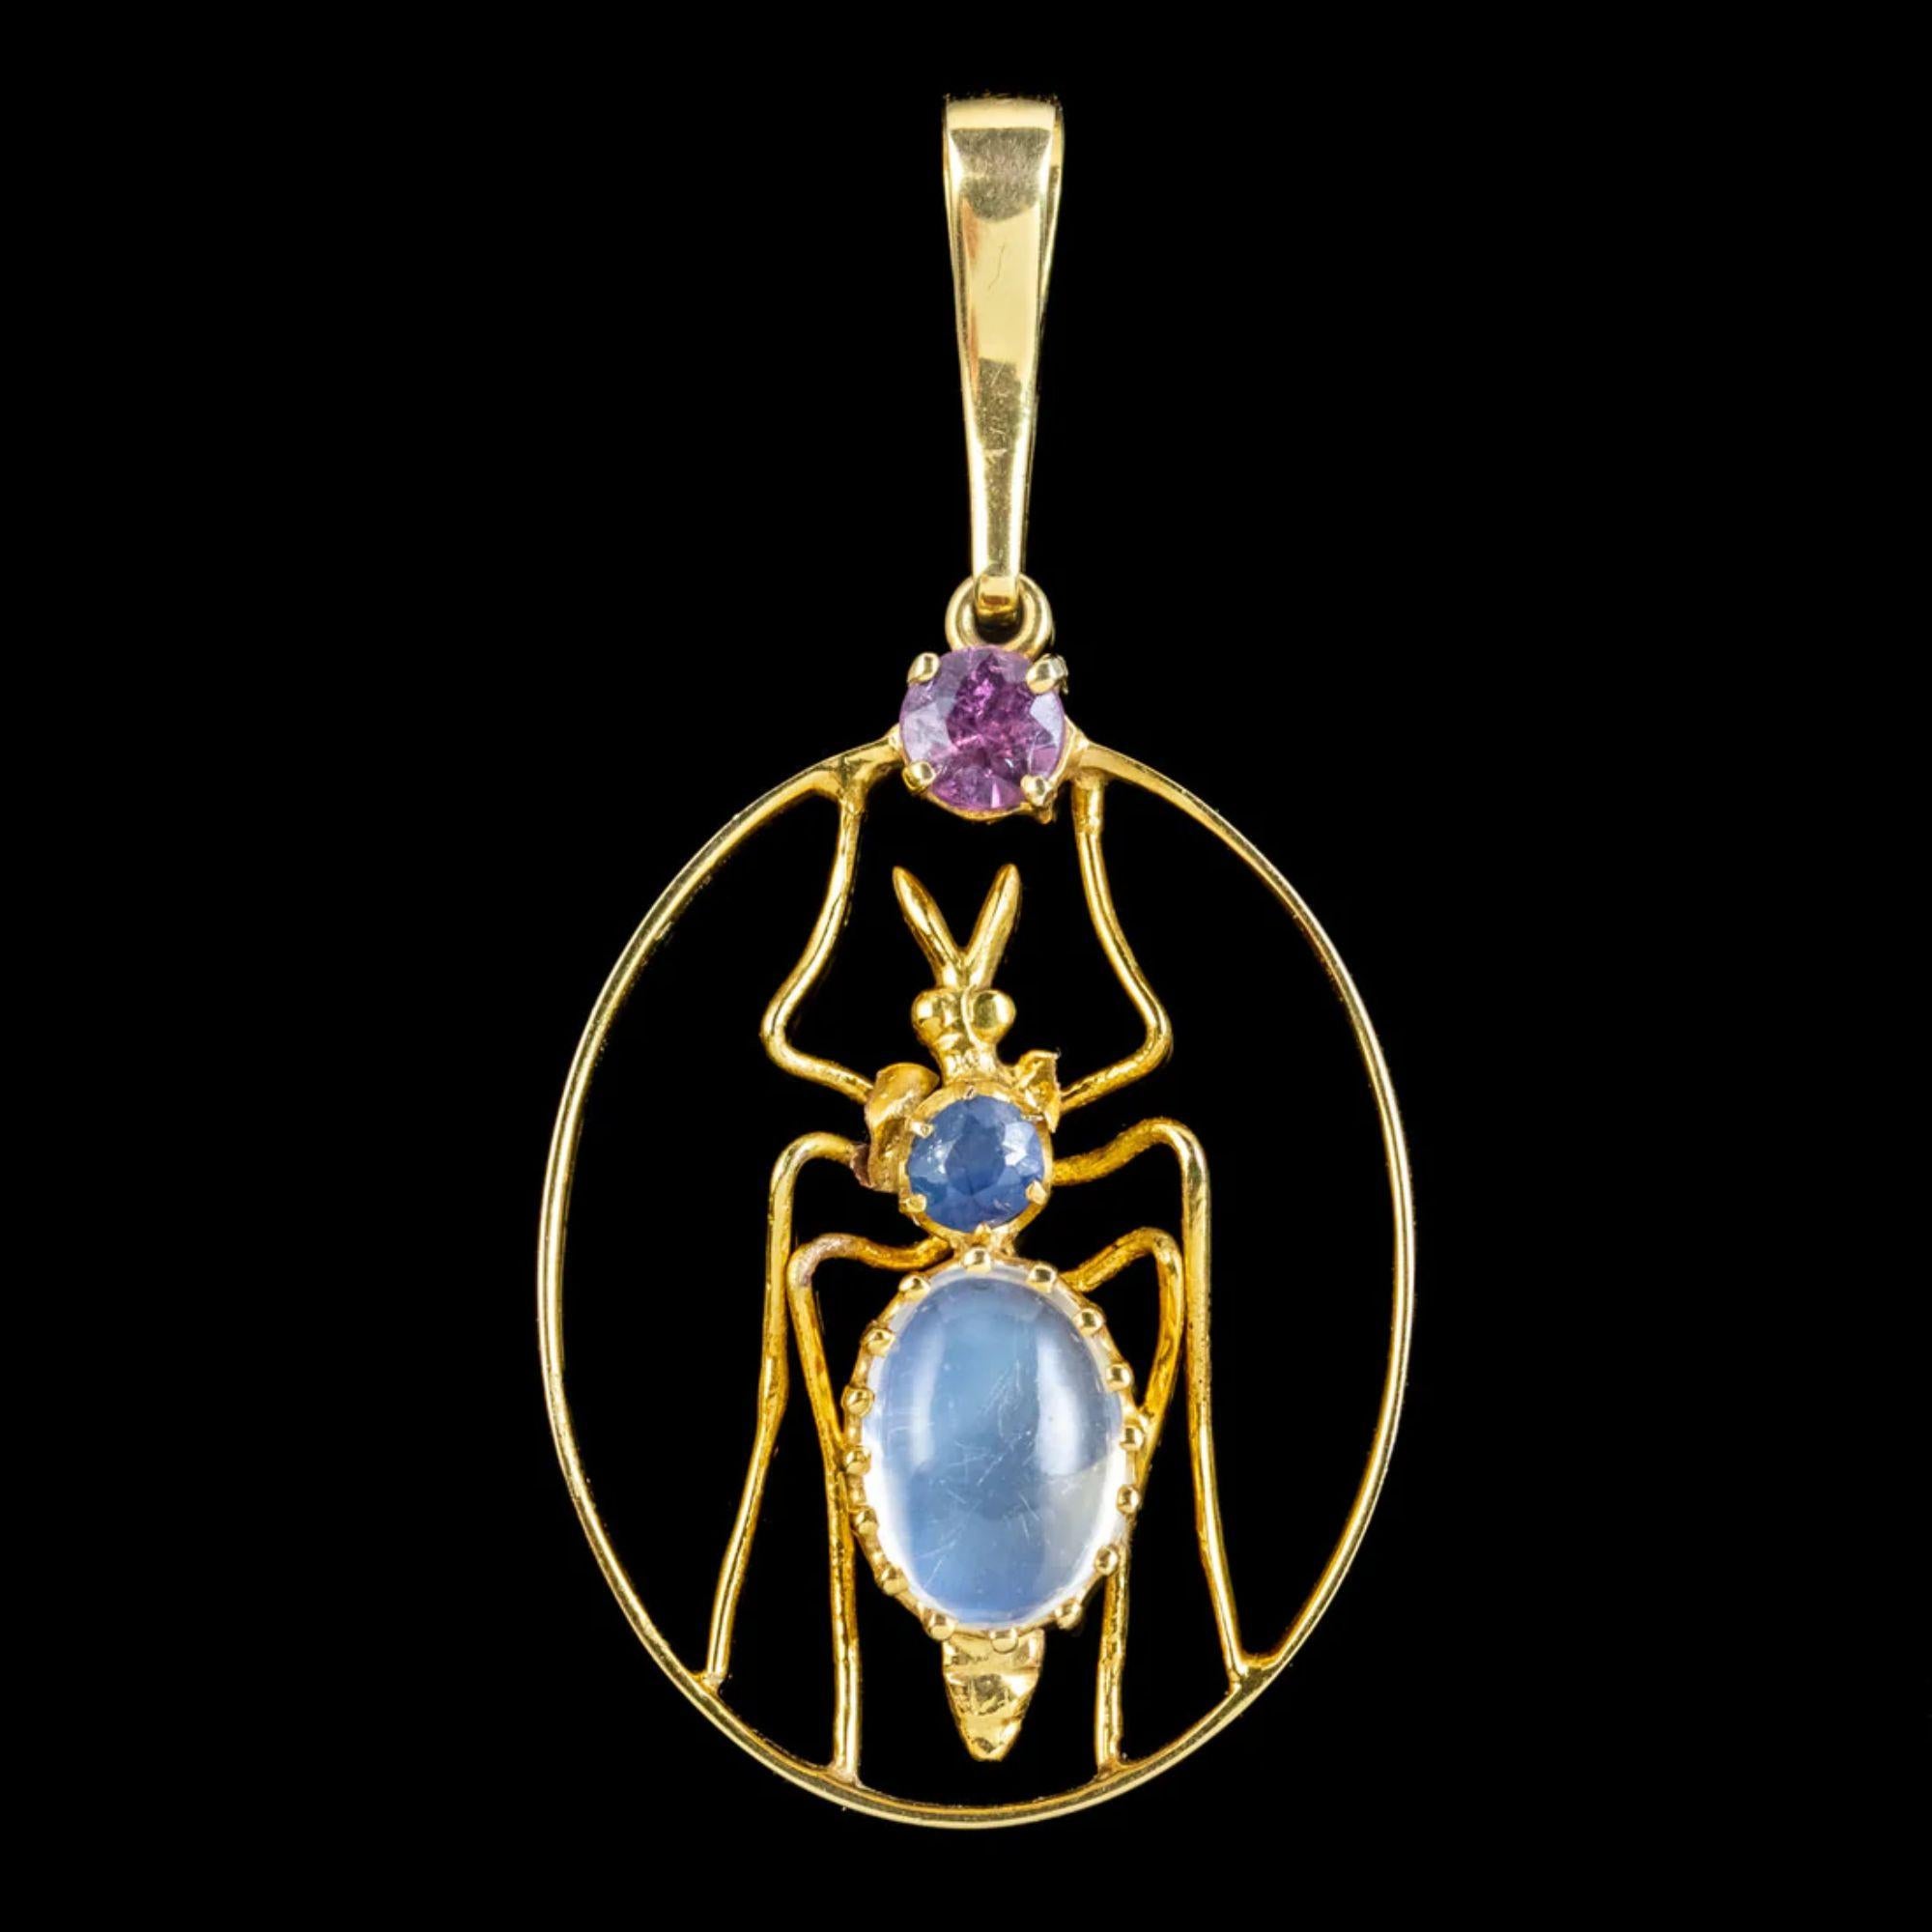 A fabulous antique Victorian pendant from the late 19th Century featuring a colourful insect claw set with a glowing cabochon moonstone abdomen (approx. 1.3ct) and a blue sapphire thorax, with a violet amethyst resting at the top. 

Insect jewellery